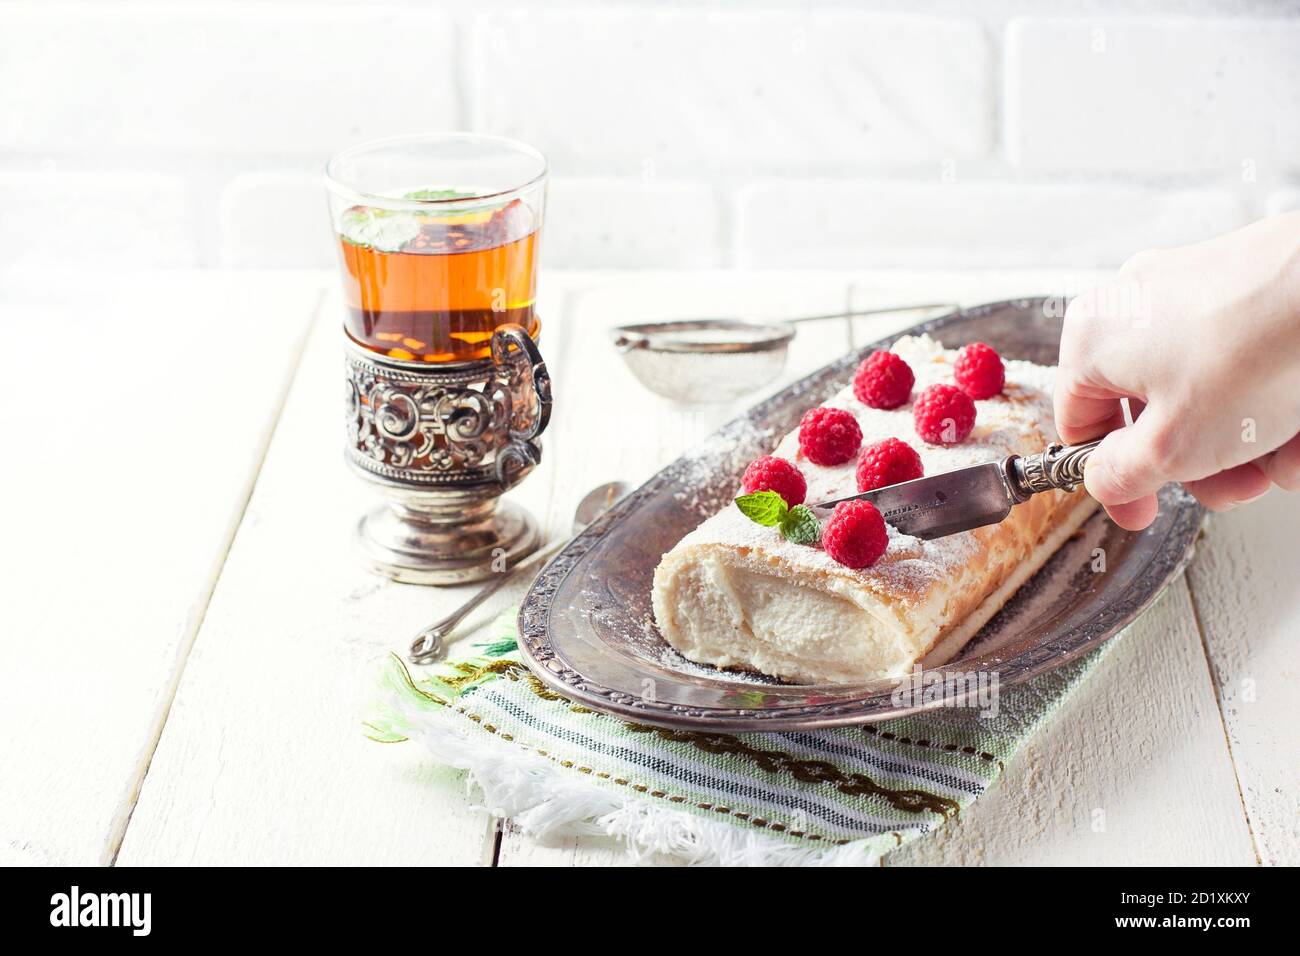 Swiss roll with cream, berries and tea on a light background. Vintage. Stock Photo